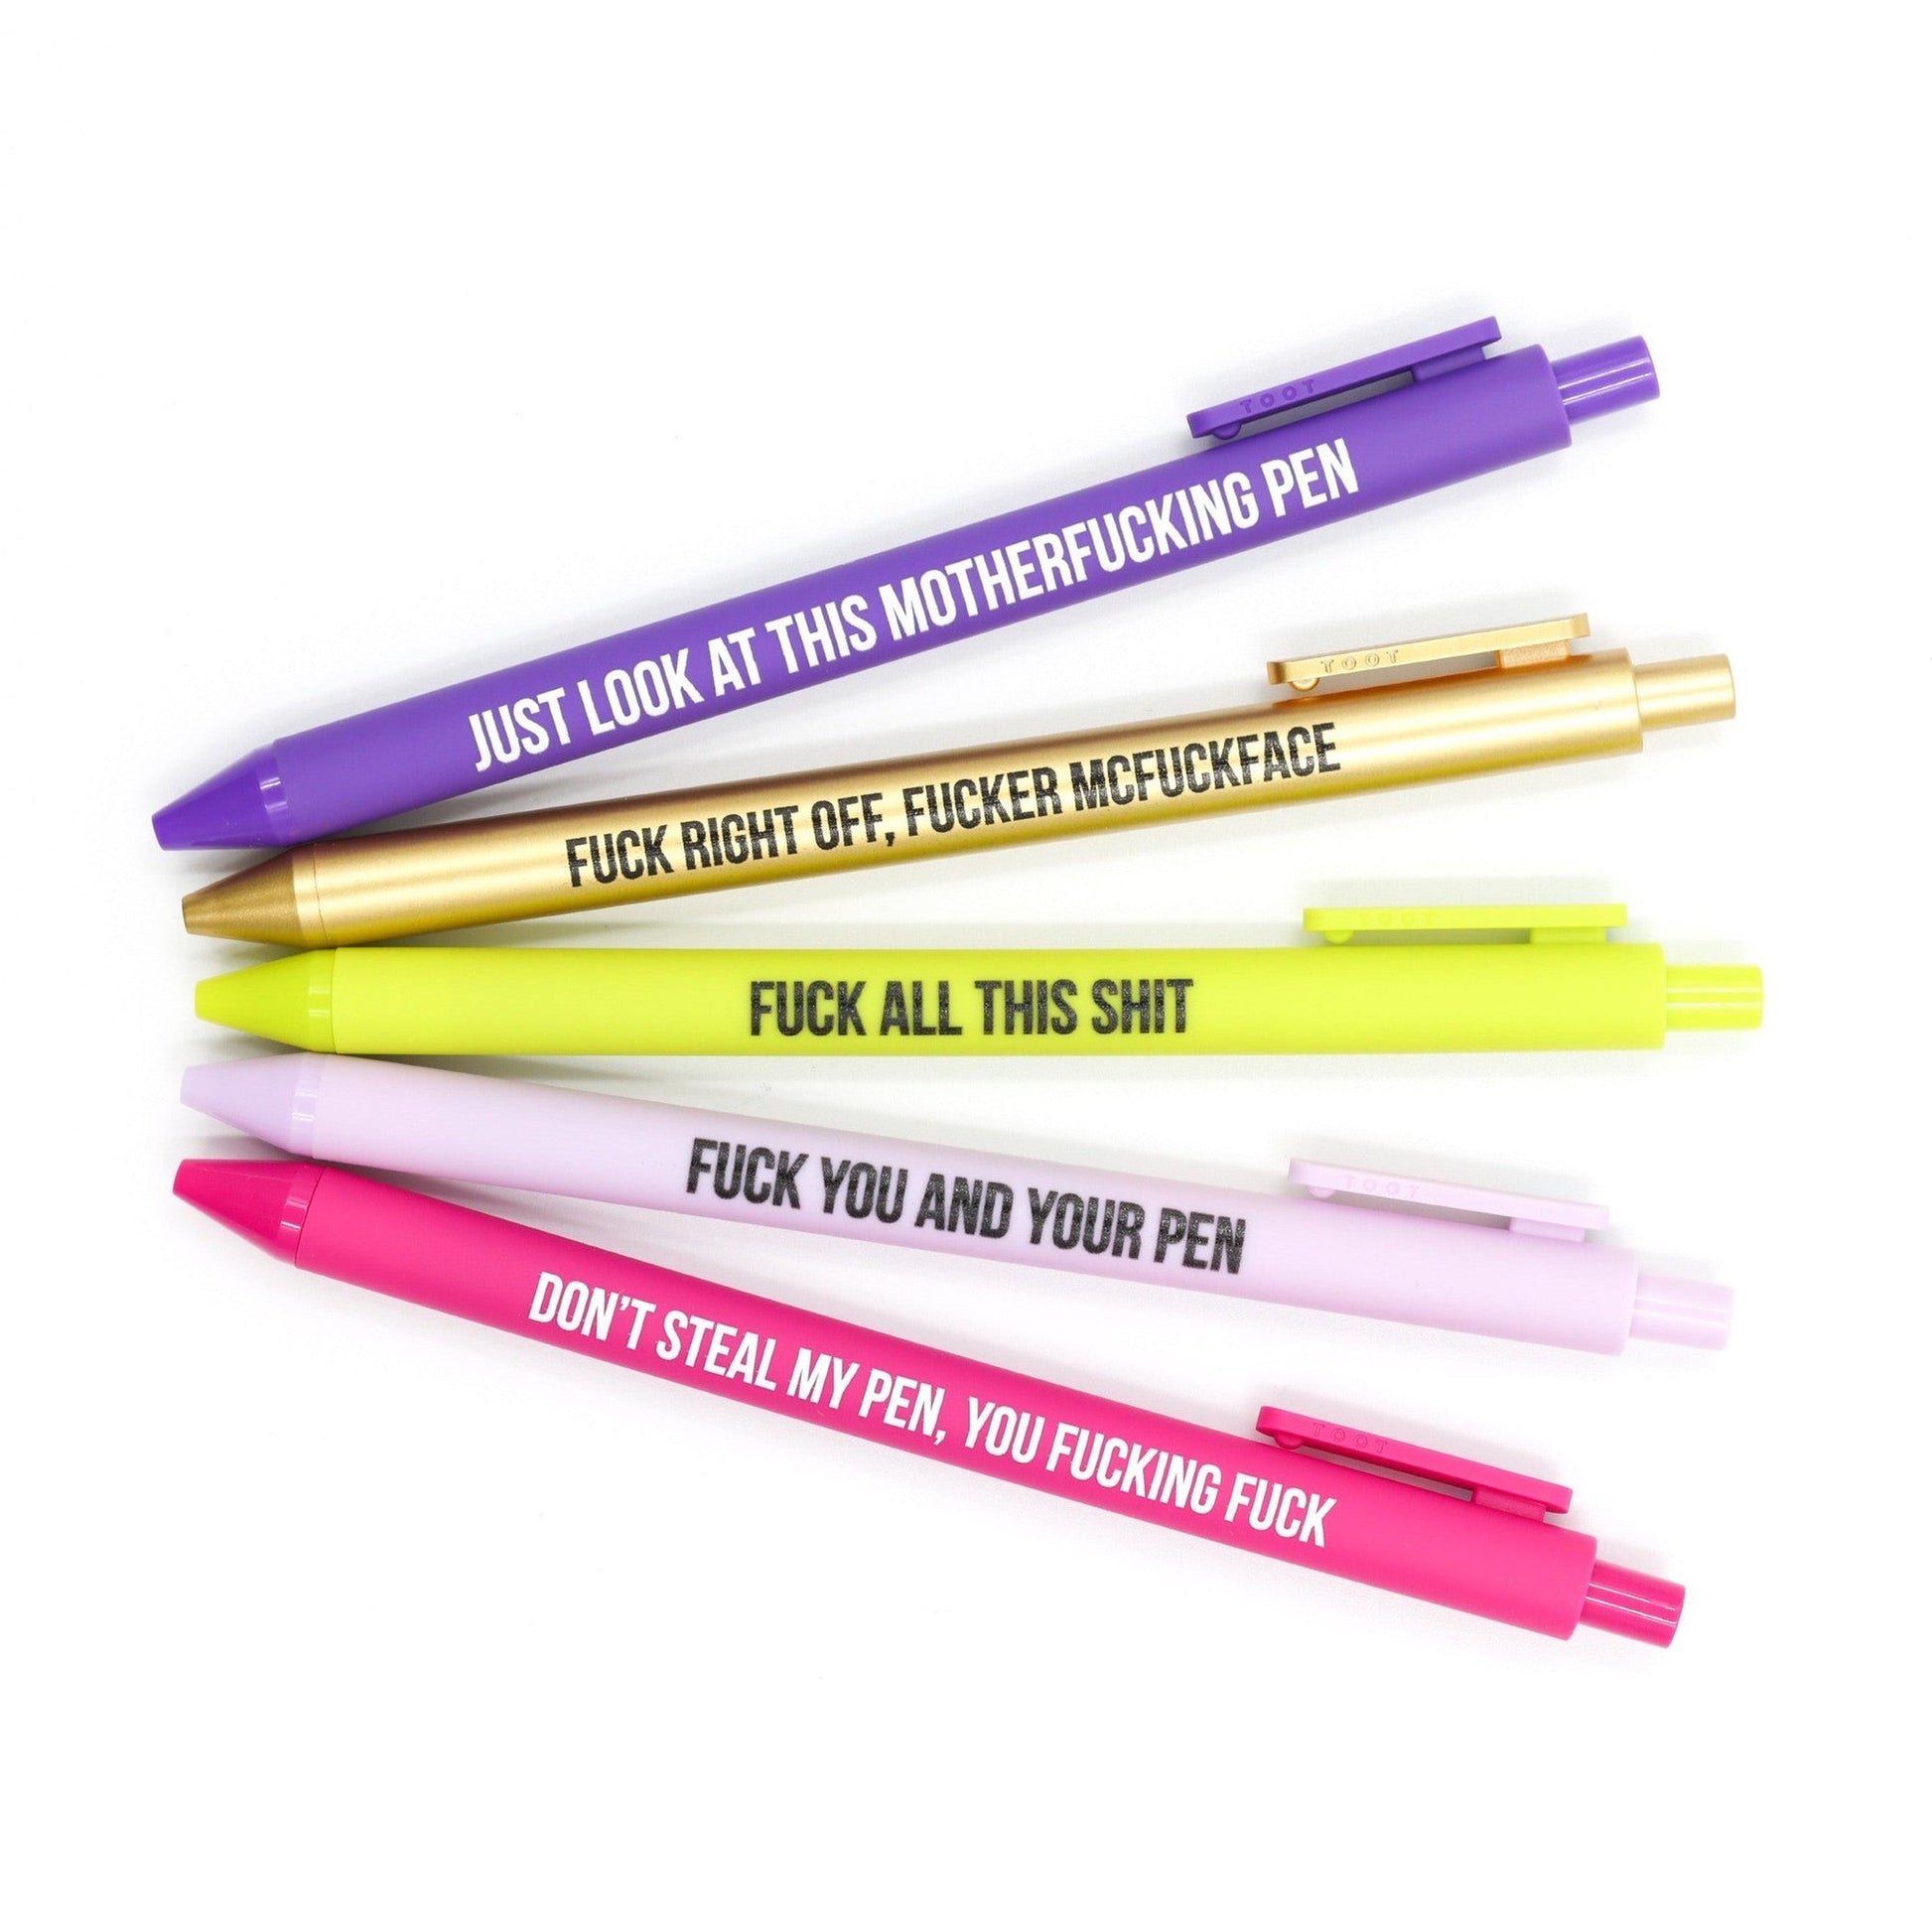 Sweary Fuck Pens Cussing Pen Gift Set - 5 Multicolored Gel Pens Rife with Profanity by The Bullish Store